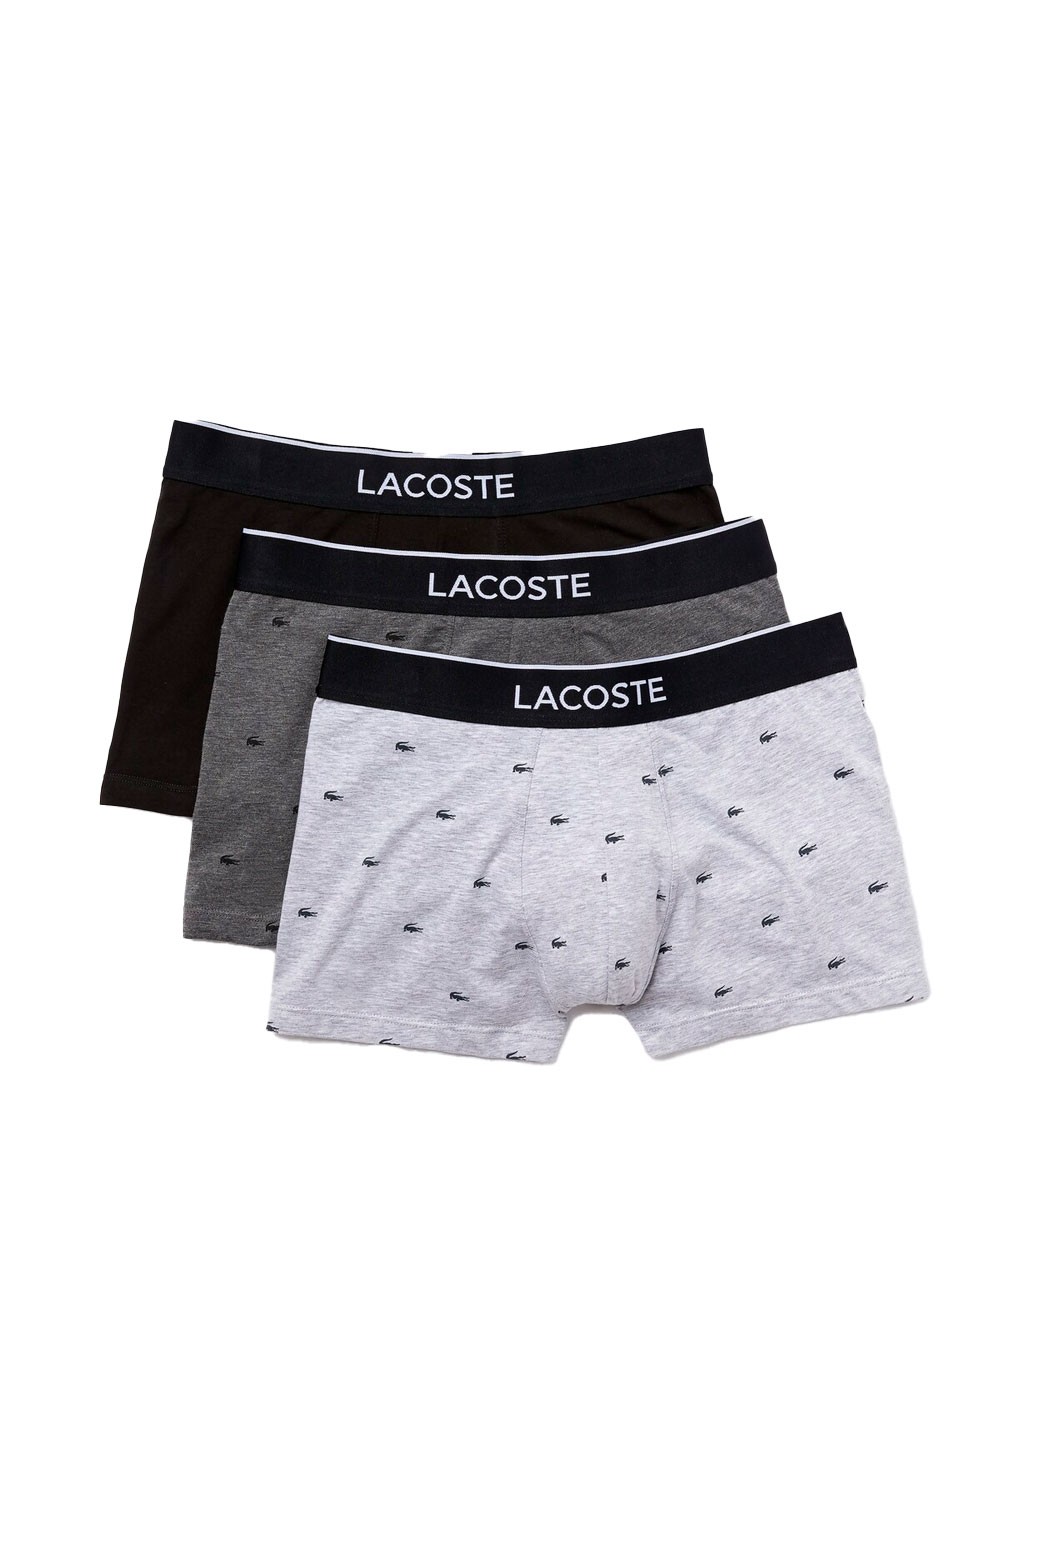 Boxers Lacoste Courts Pack 3 Negro y gris